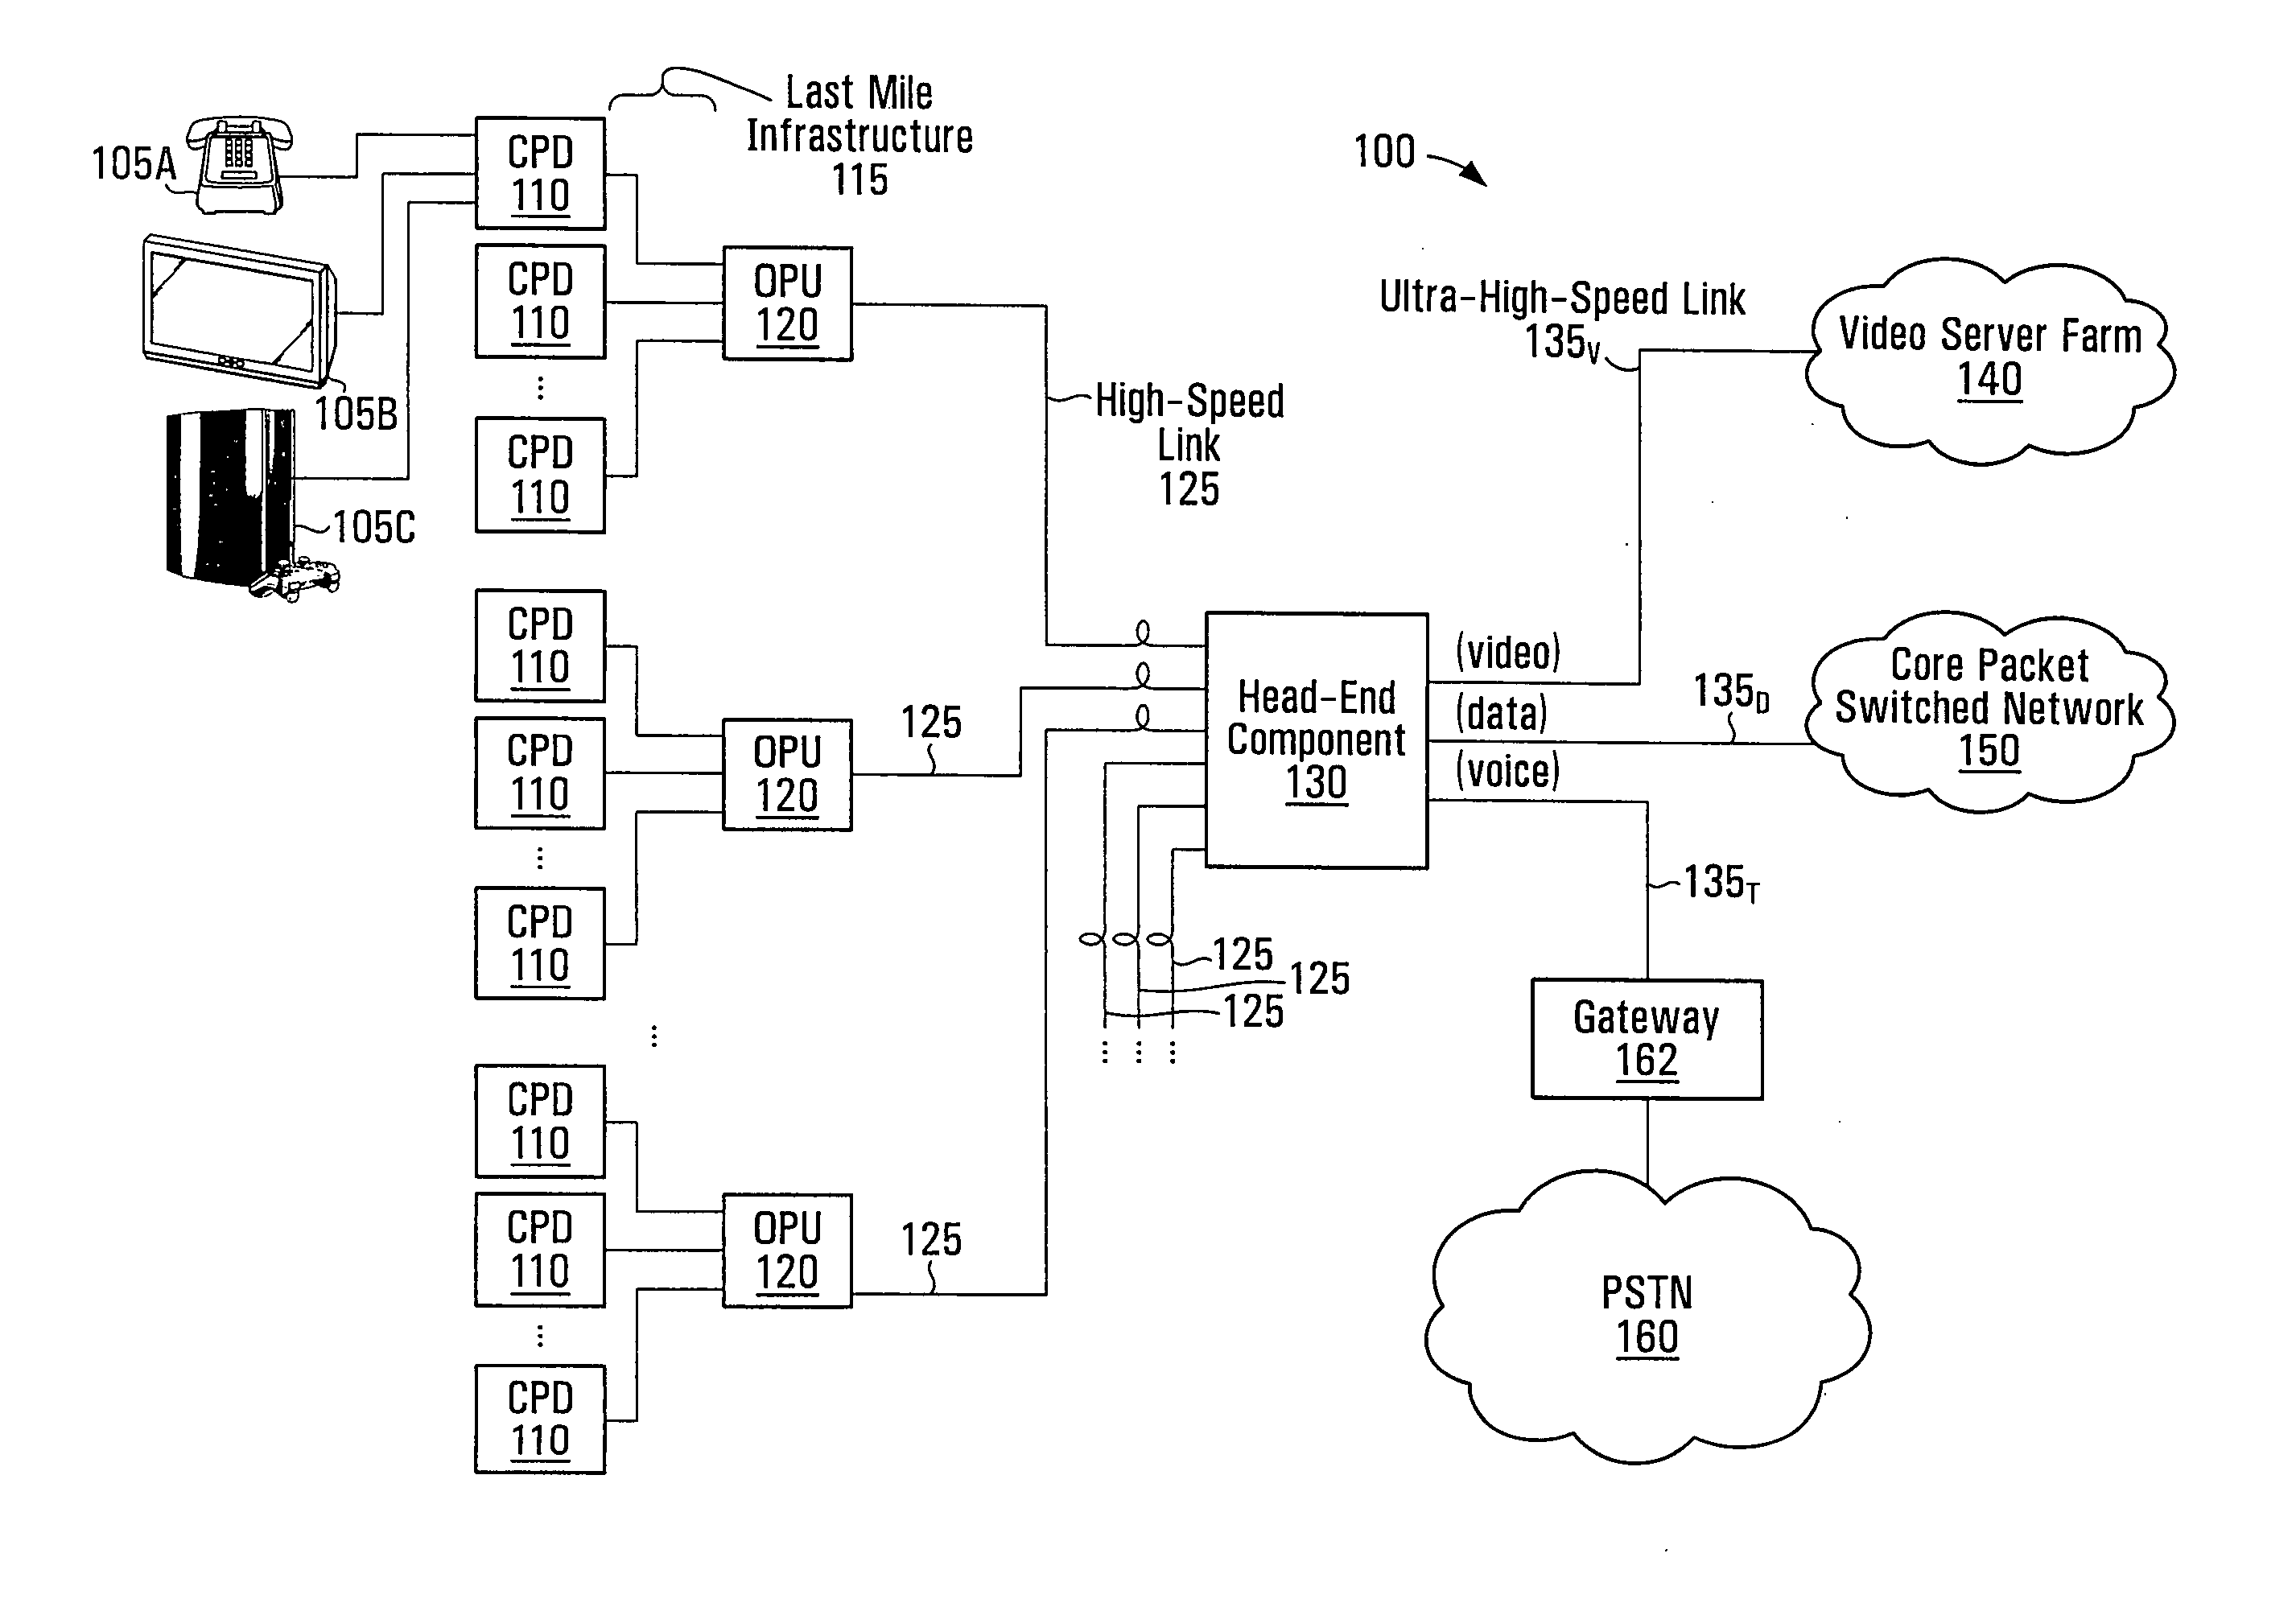 Method and system for service-based regulation of traffic flow to customer premises devices